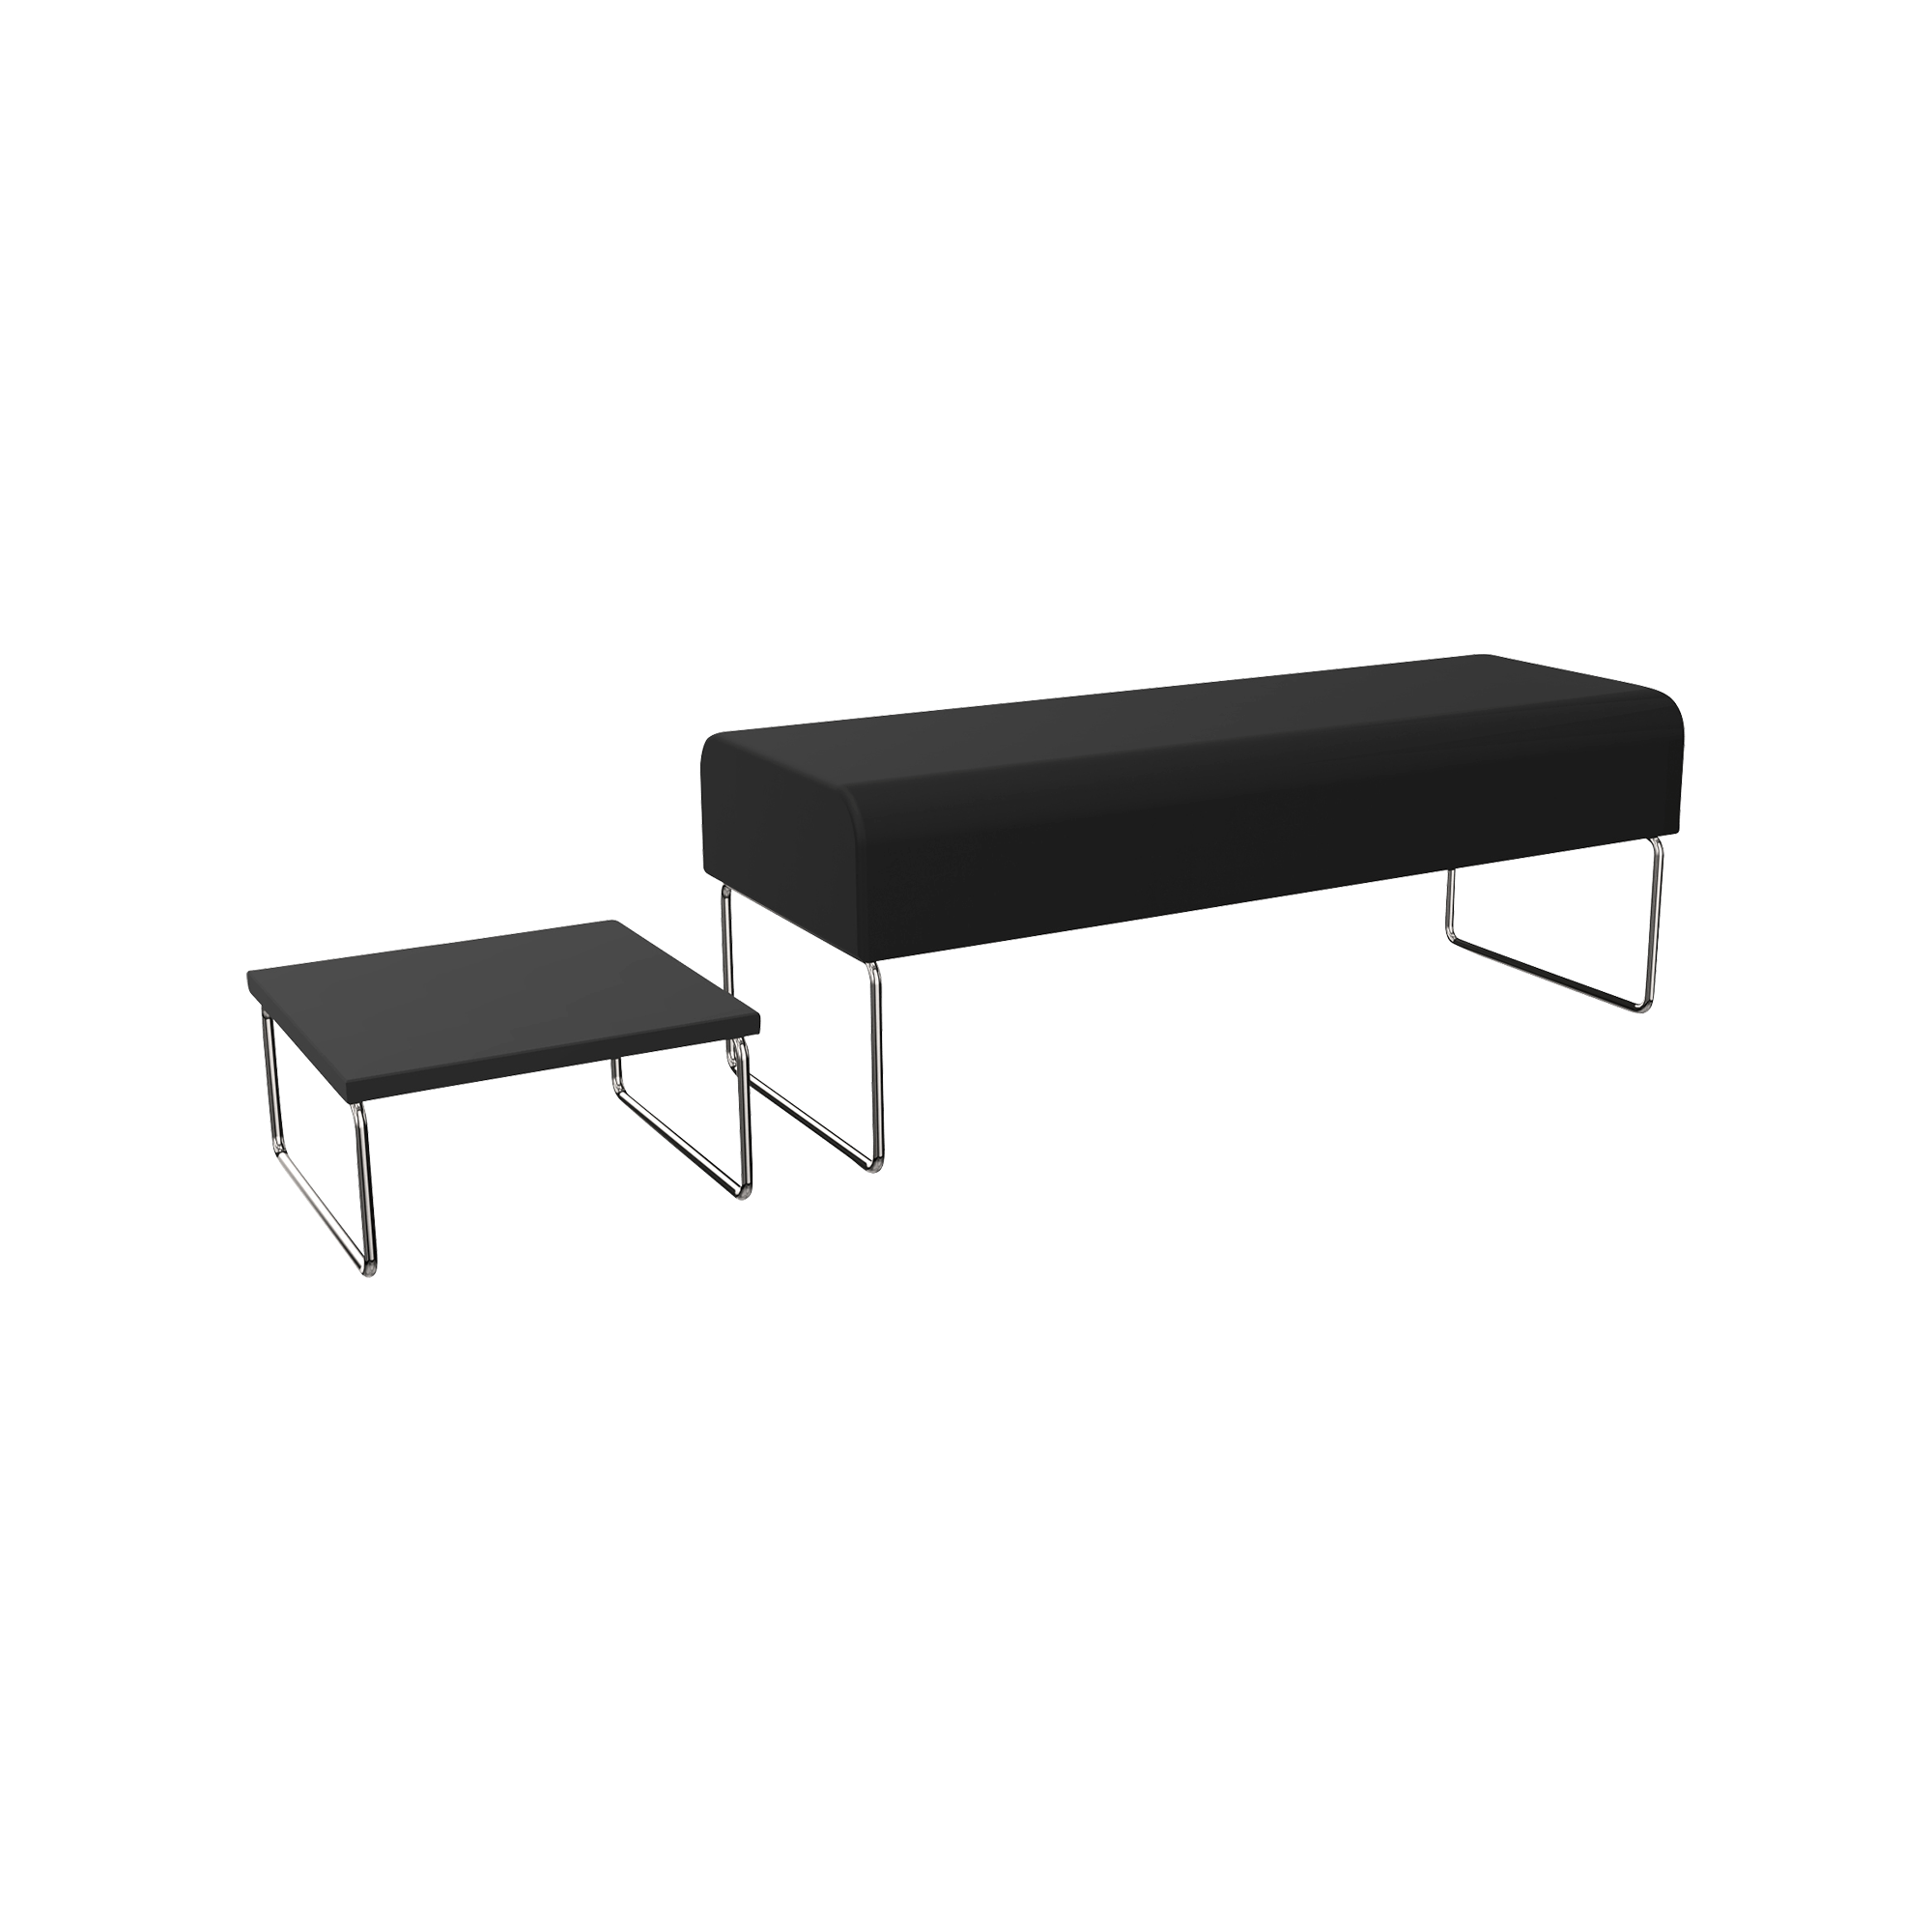 A black upholstered bench and office stool